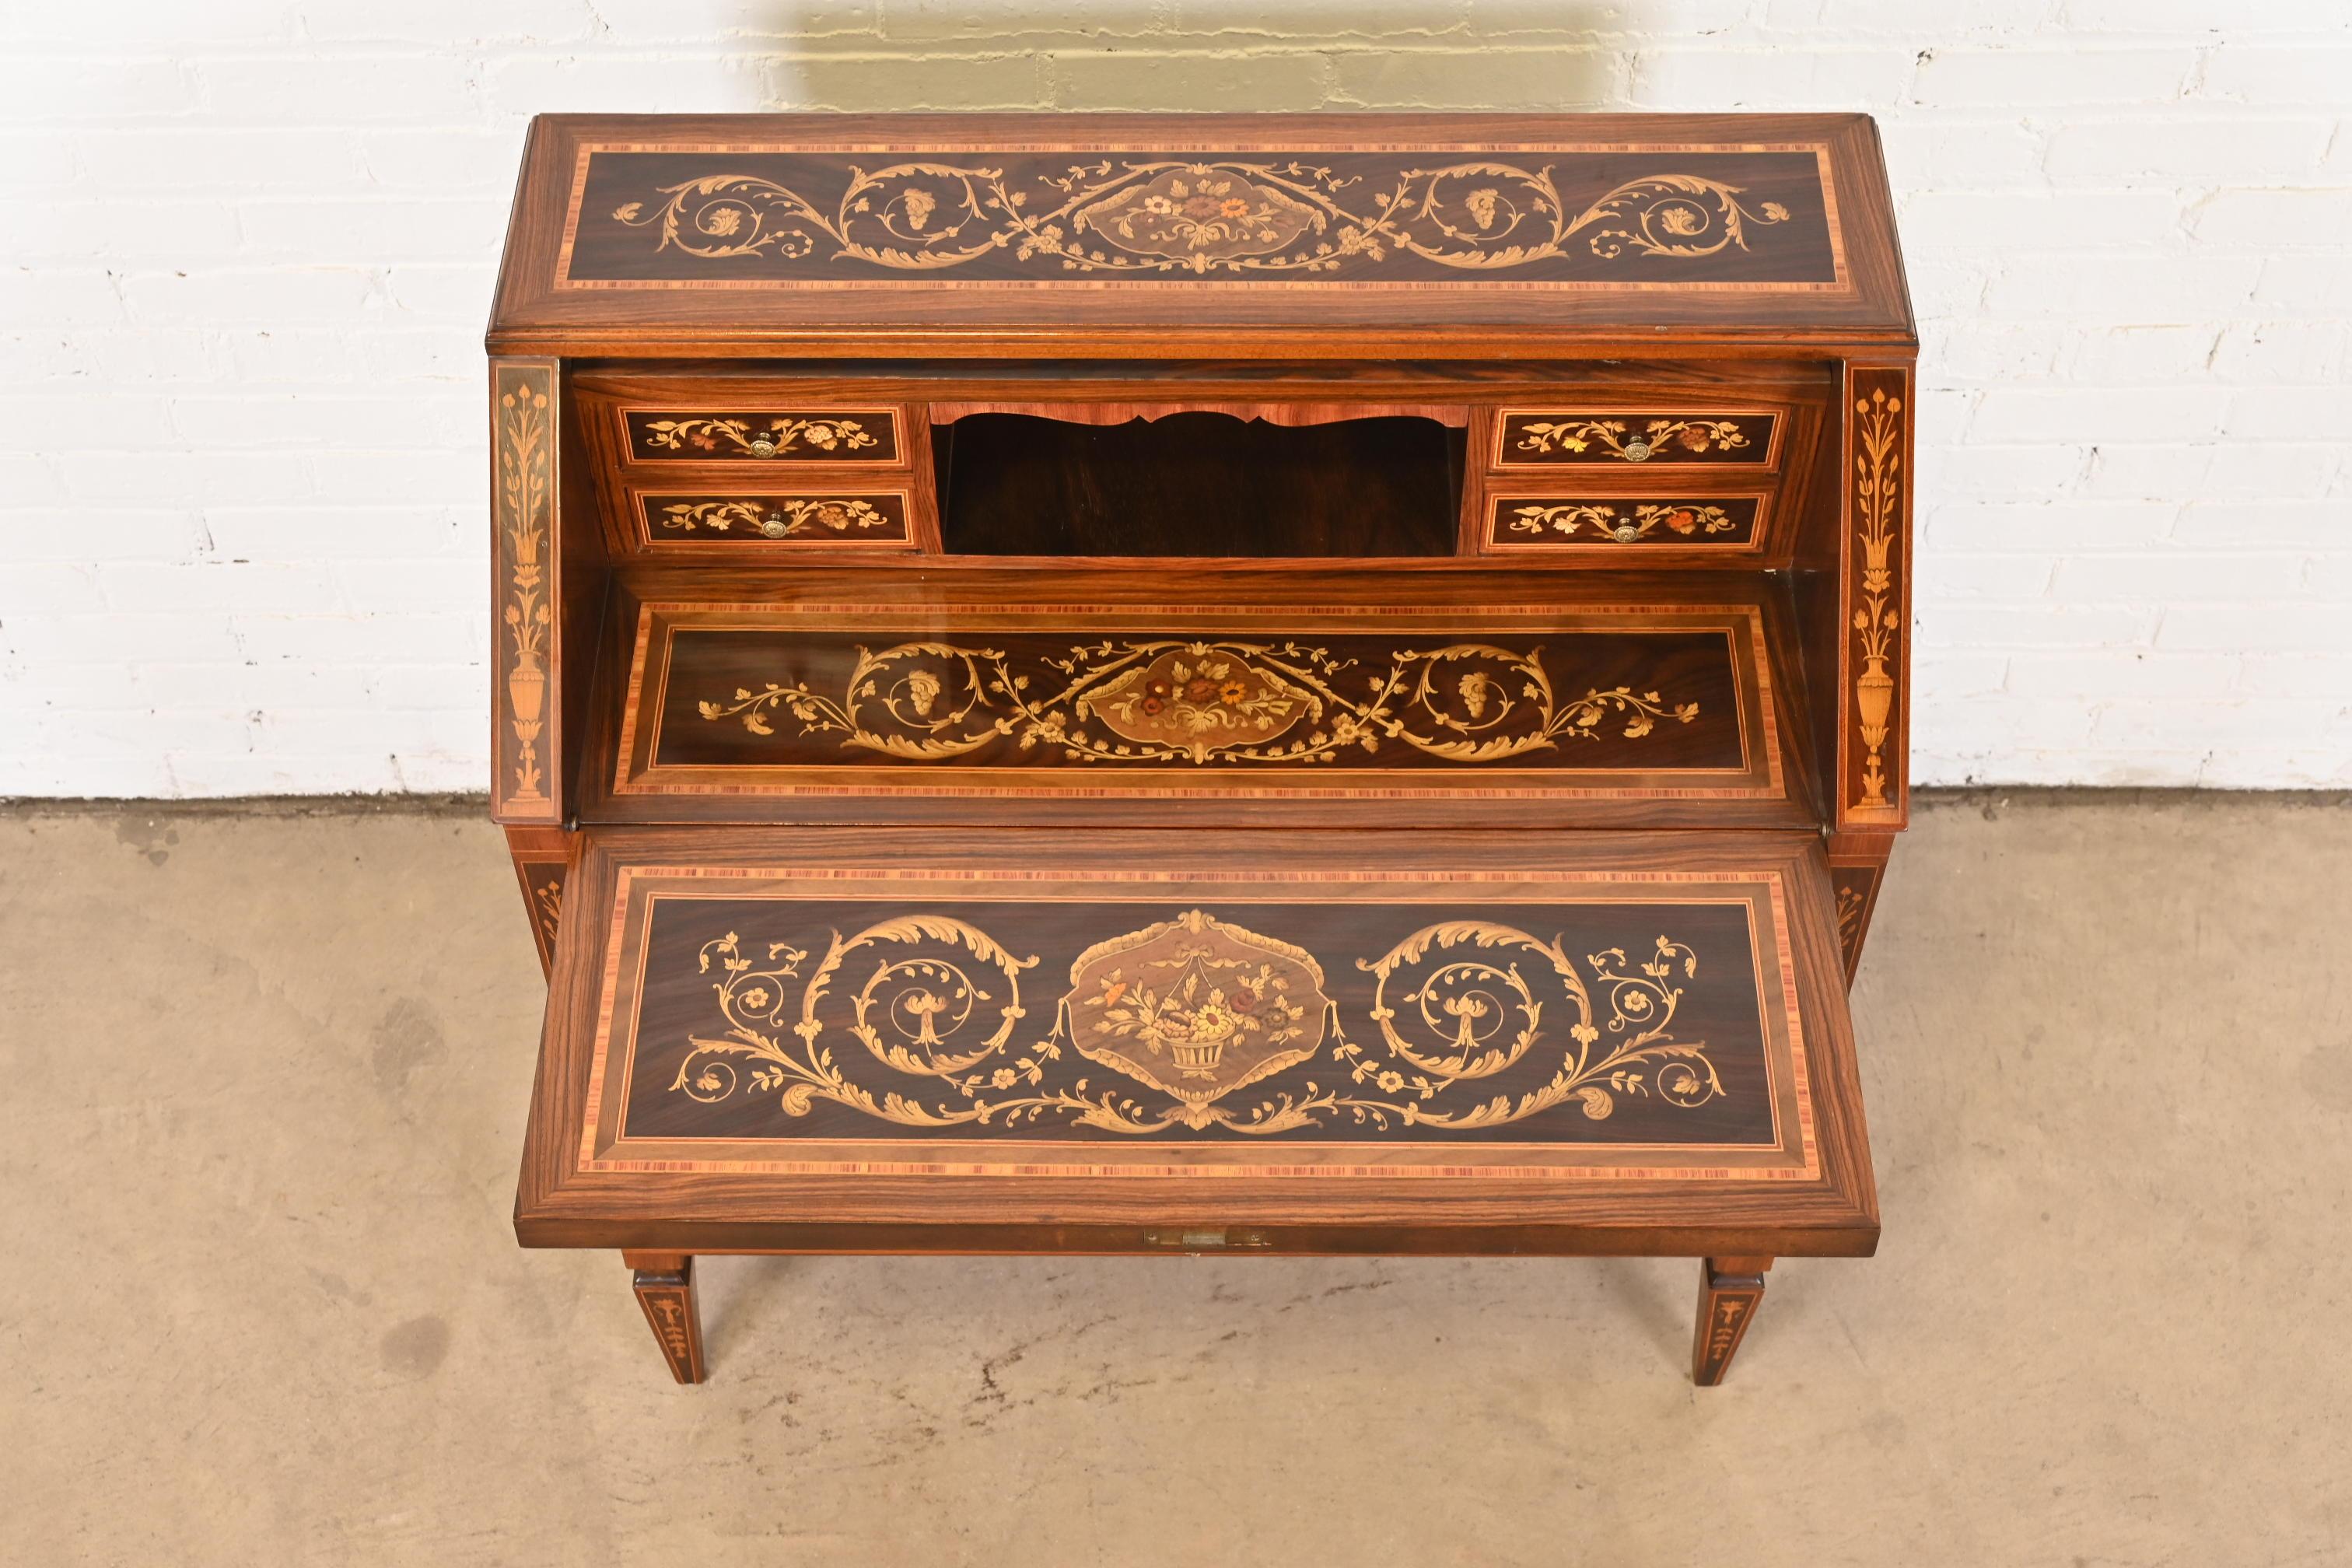 Brass Italian Neoclassical Rosewood Inlaid Marquetry Slant Front Secretary Desk